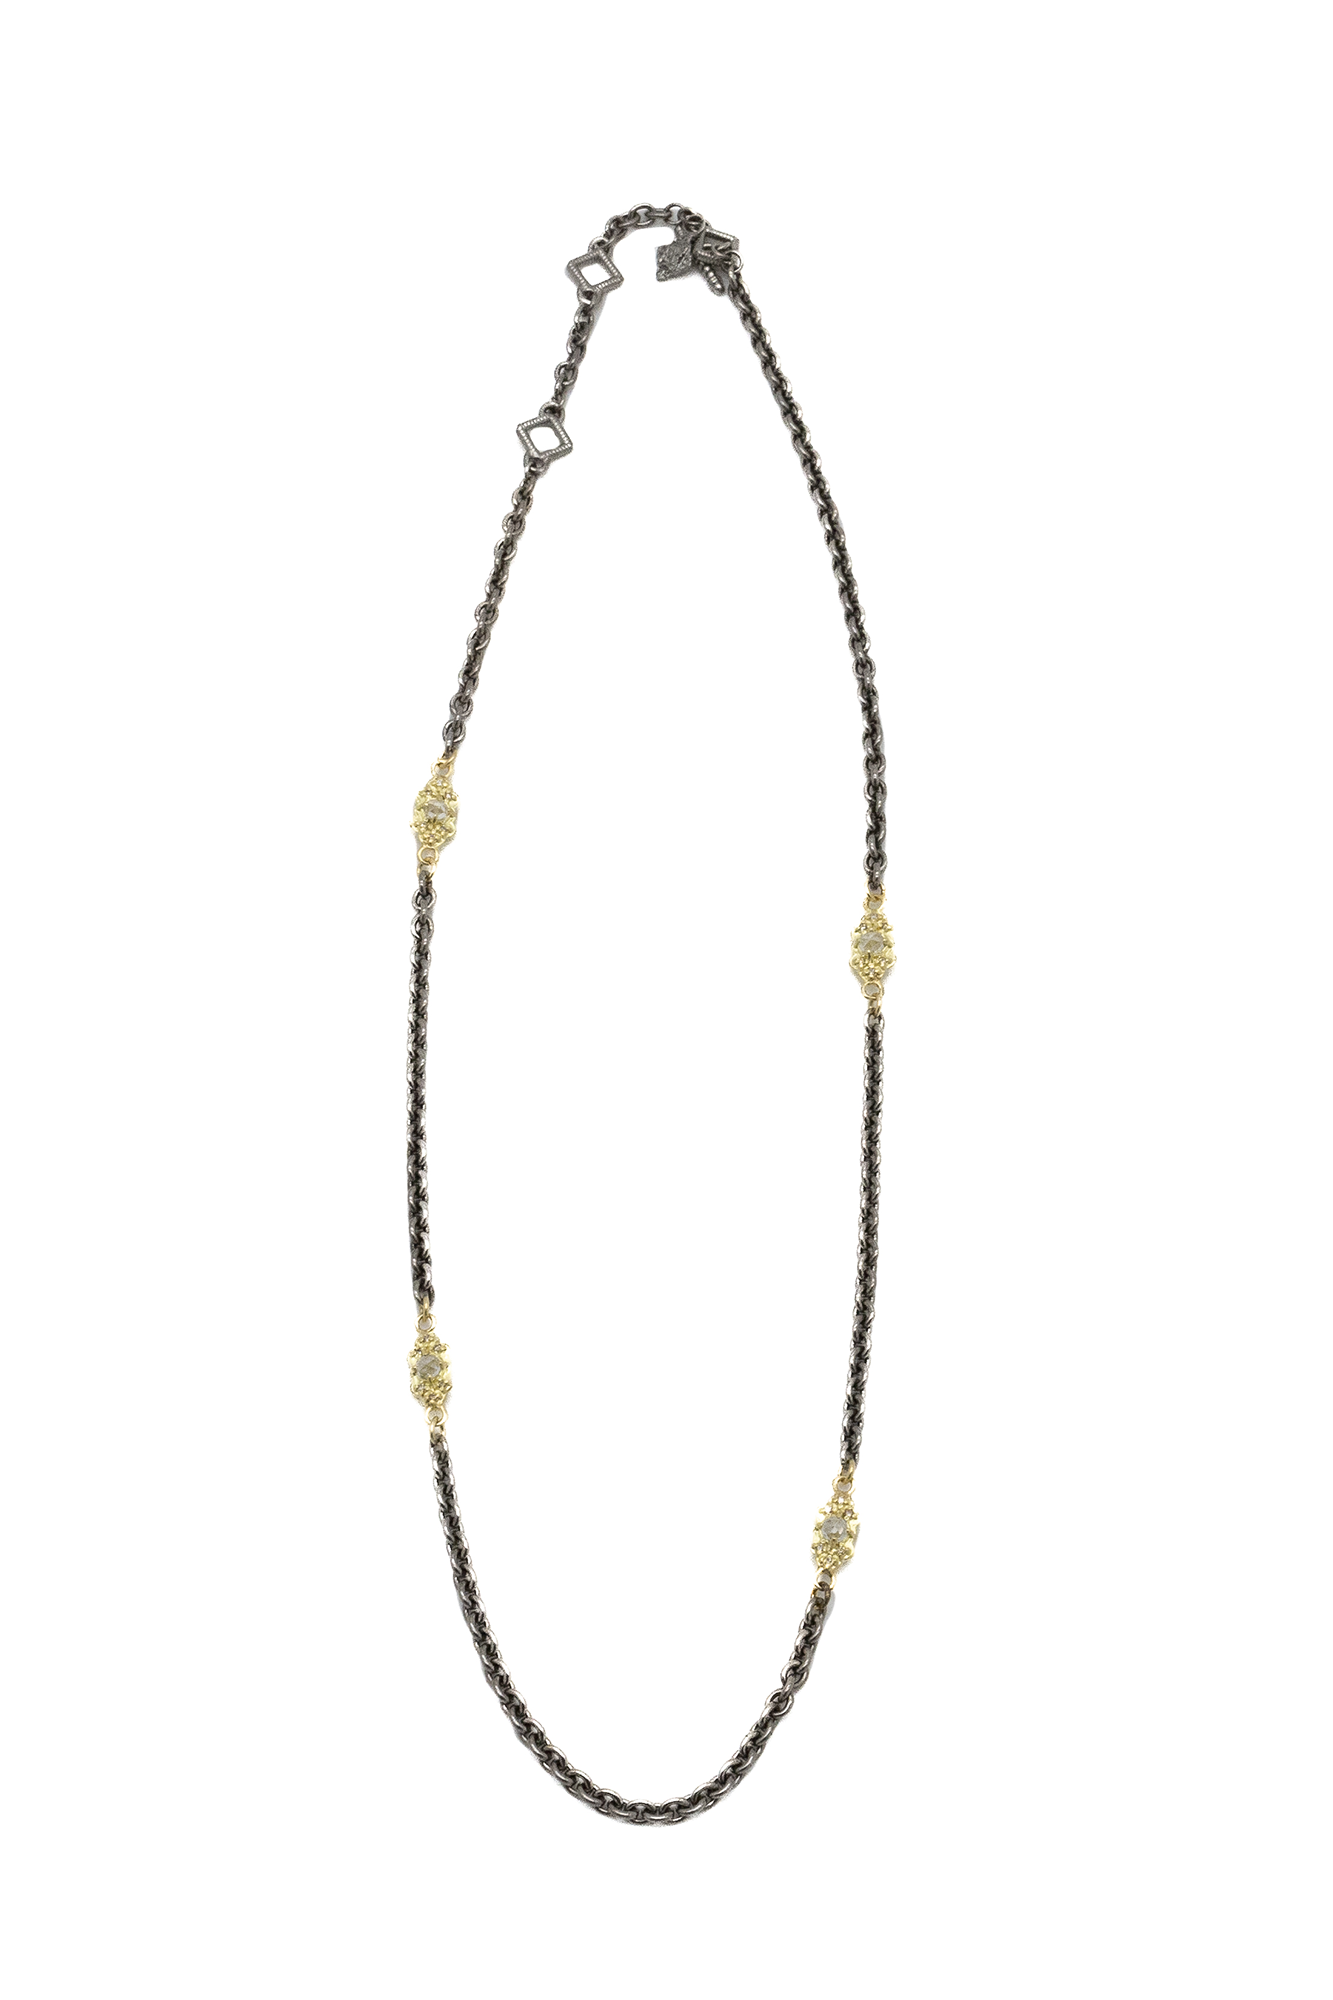 This Gold Scroll Link Necklace from Armenta is crafted with 18k yellow gold and sterling silver using an 18" grey cable chain with carved scroll stations set with white sapphires and champagne diamonds. The intricate design and combination of metals bring a touch of Old World elegance to any outfit.